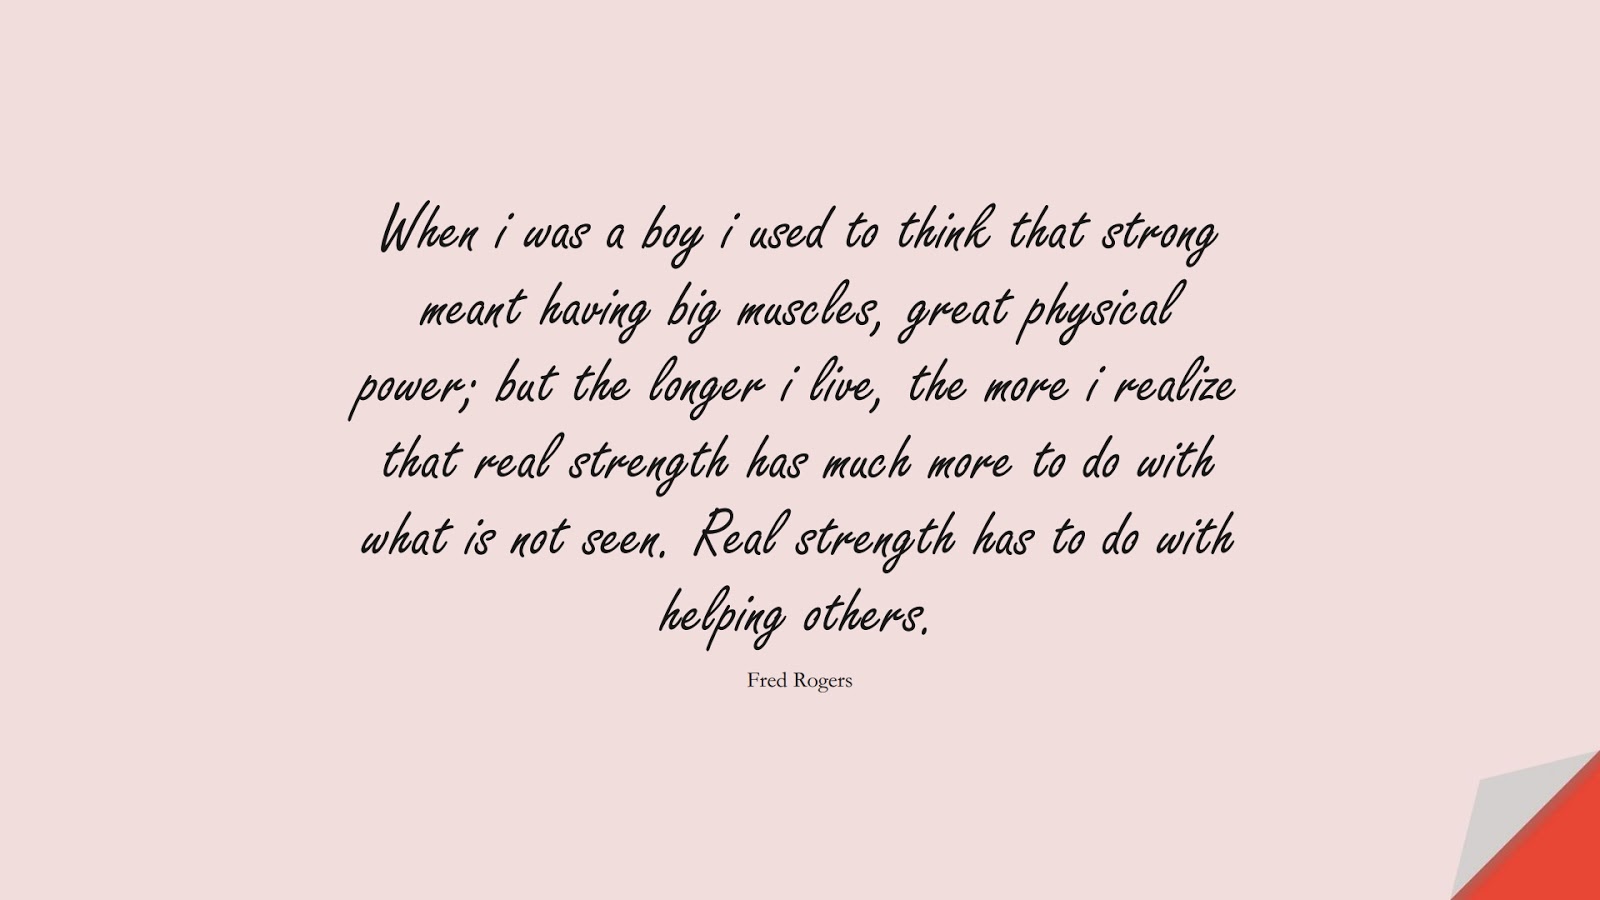 When i was a boy i used to think that strong meant having big muscles, great physical power; but the longer i live, the more i realize that real strength has much more to do with what is not seen. Real strength has to do with helping others. (Fred Rogers);  #BeingStrongQuotes